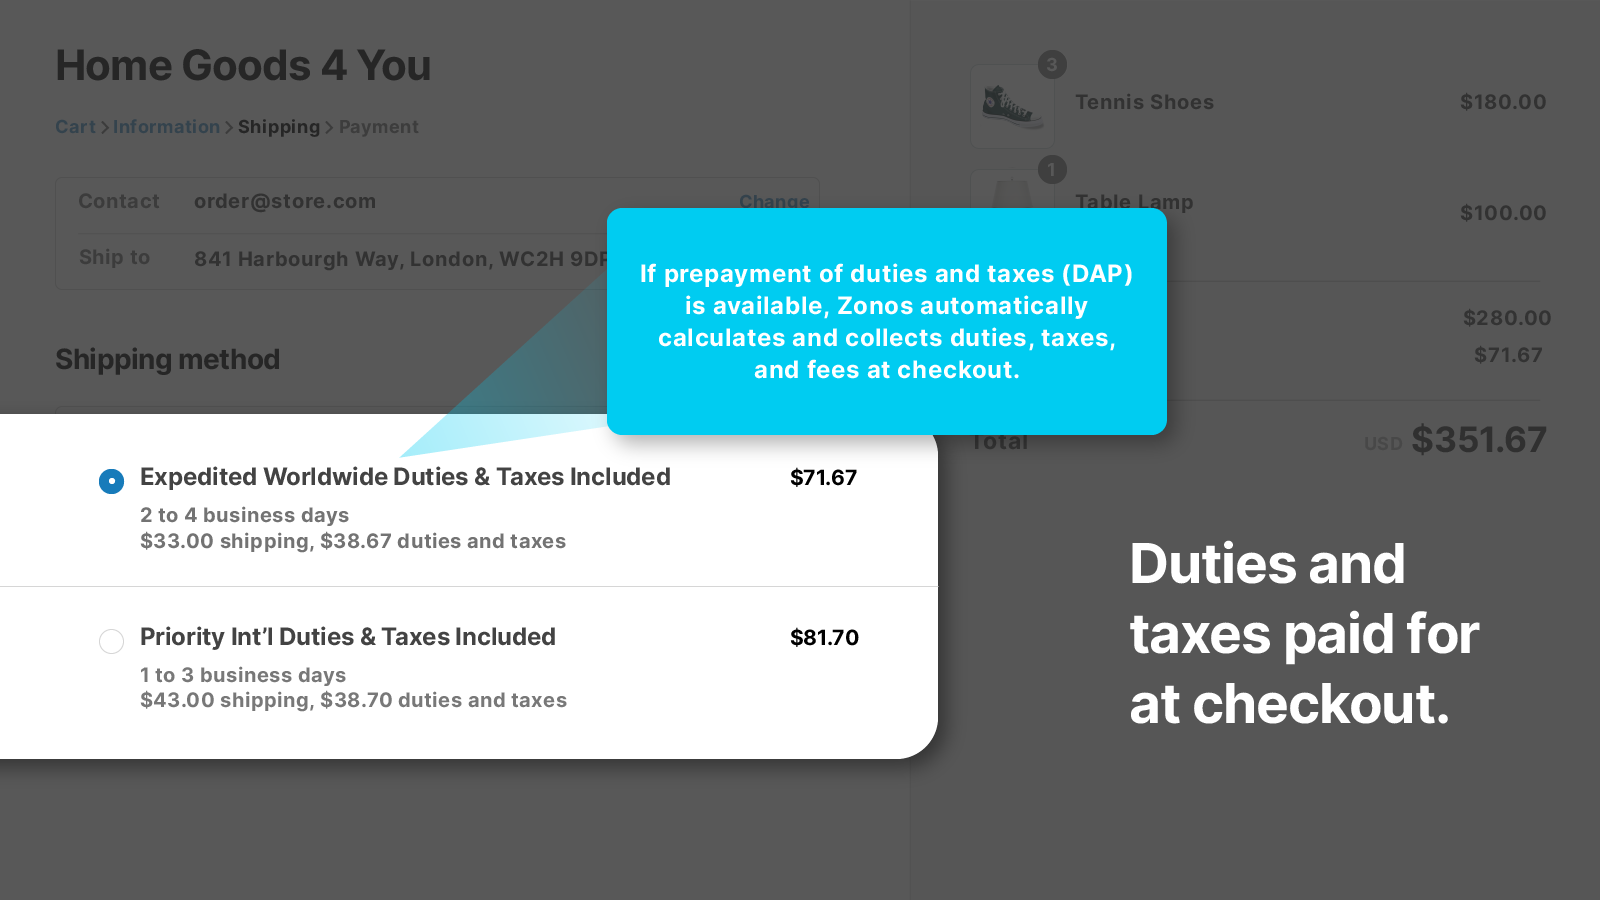 Landed cost including duties, taxes and fees prepaid at checkout